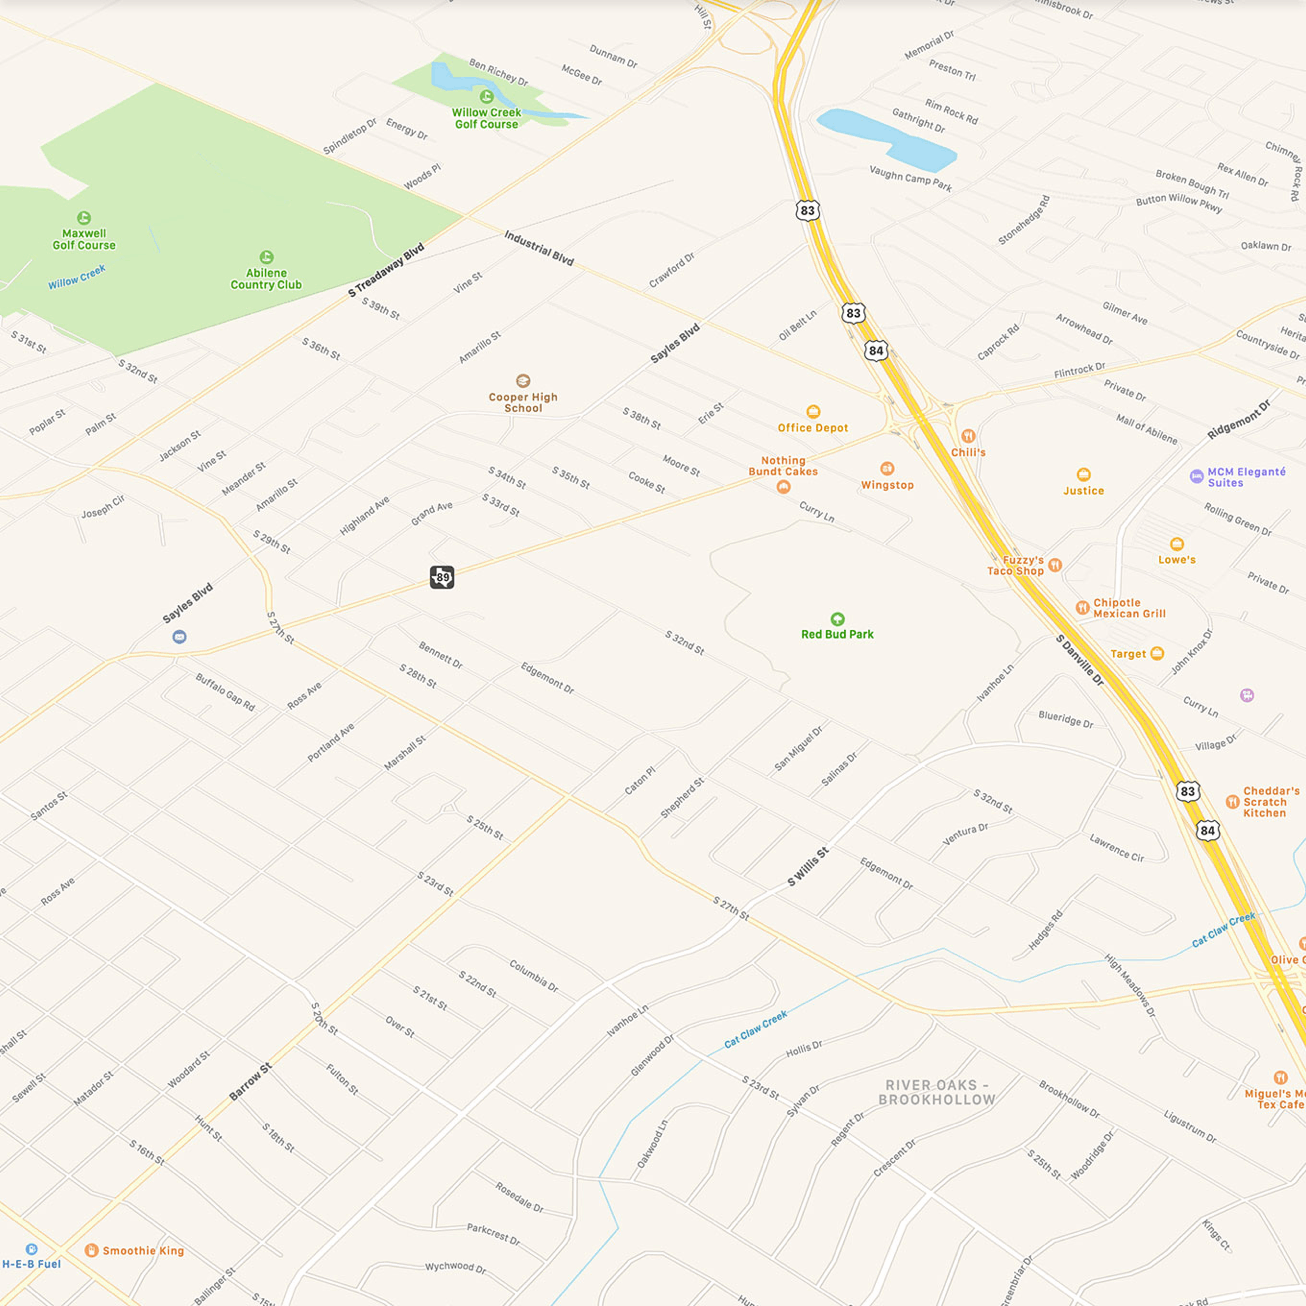 Graphic from Apple showing improved detail in Maps